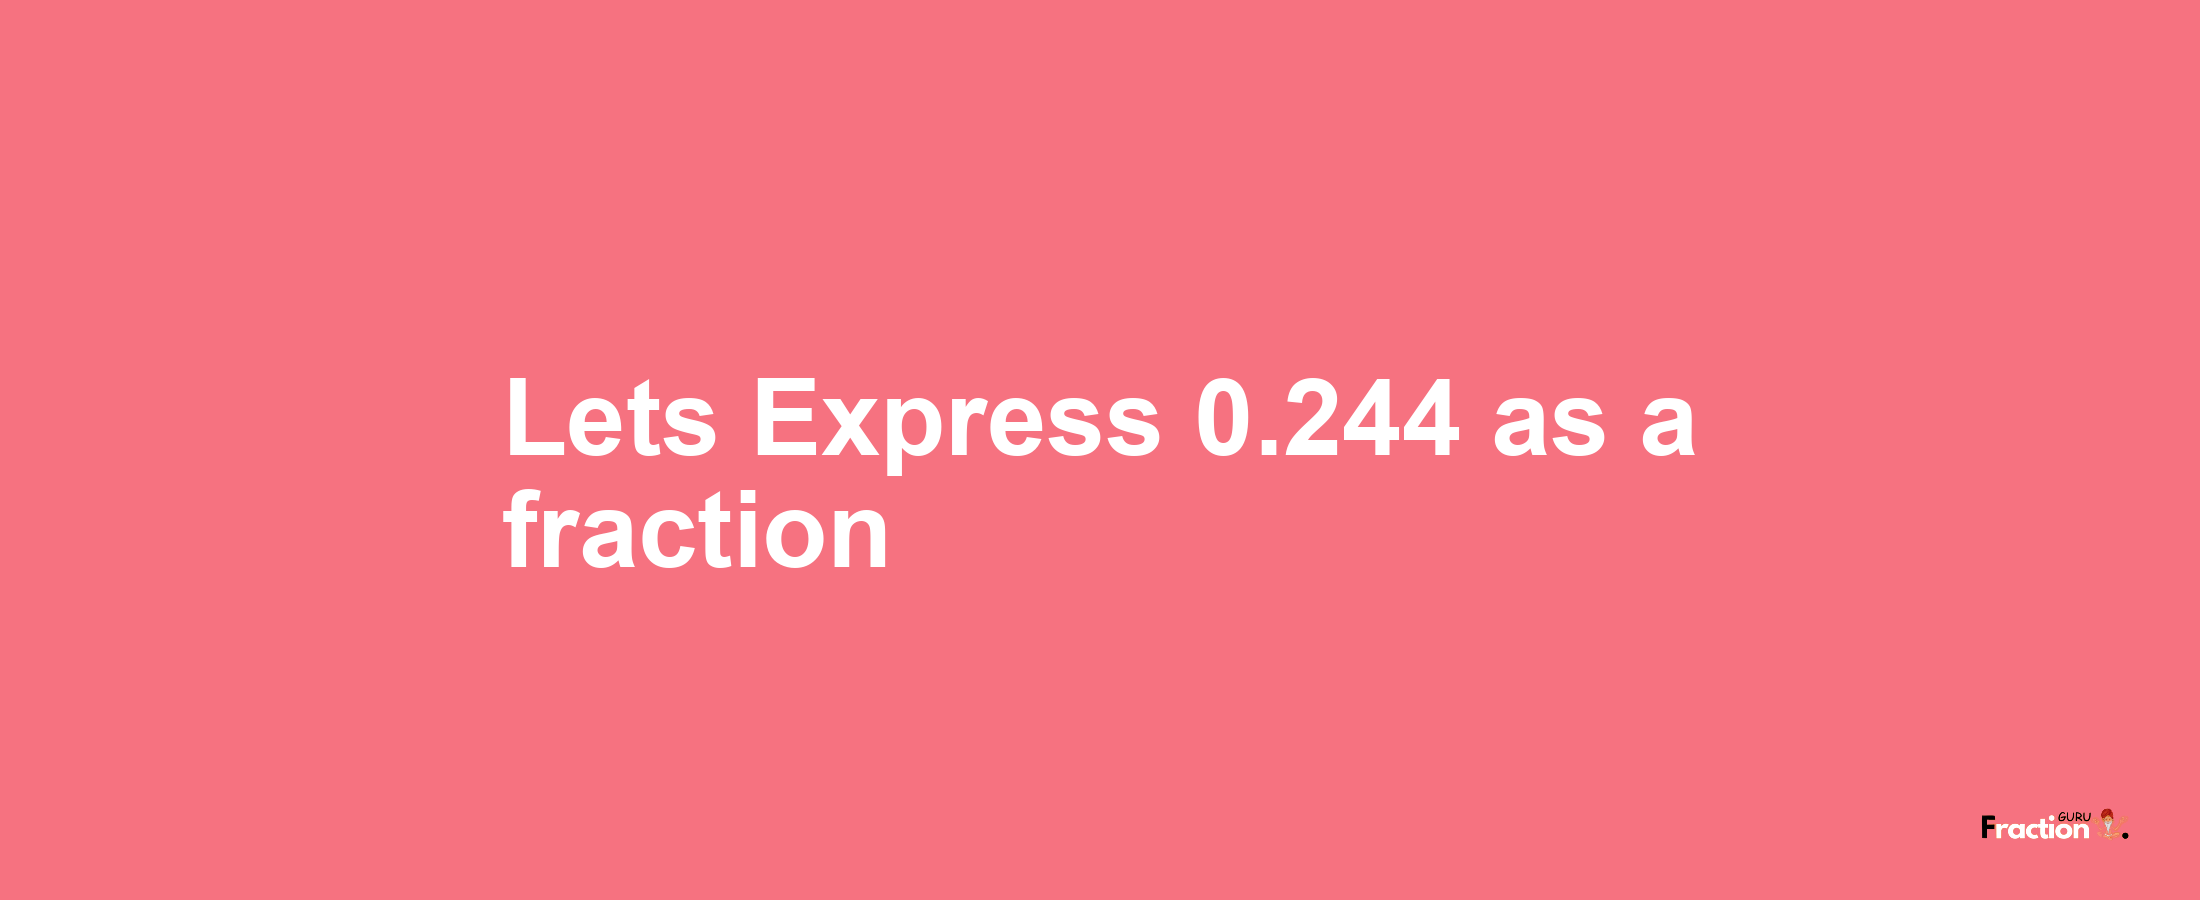 Lets Express 0.244 as afraction